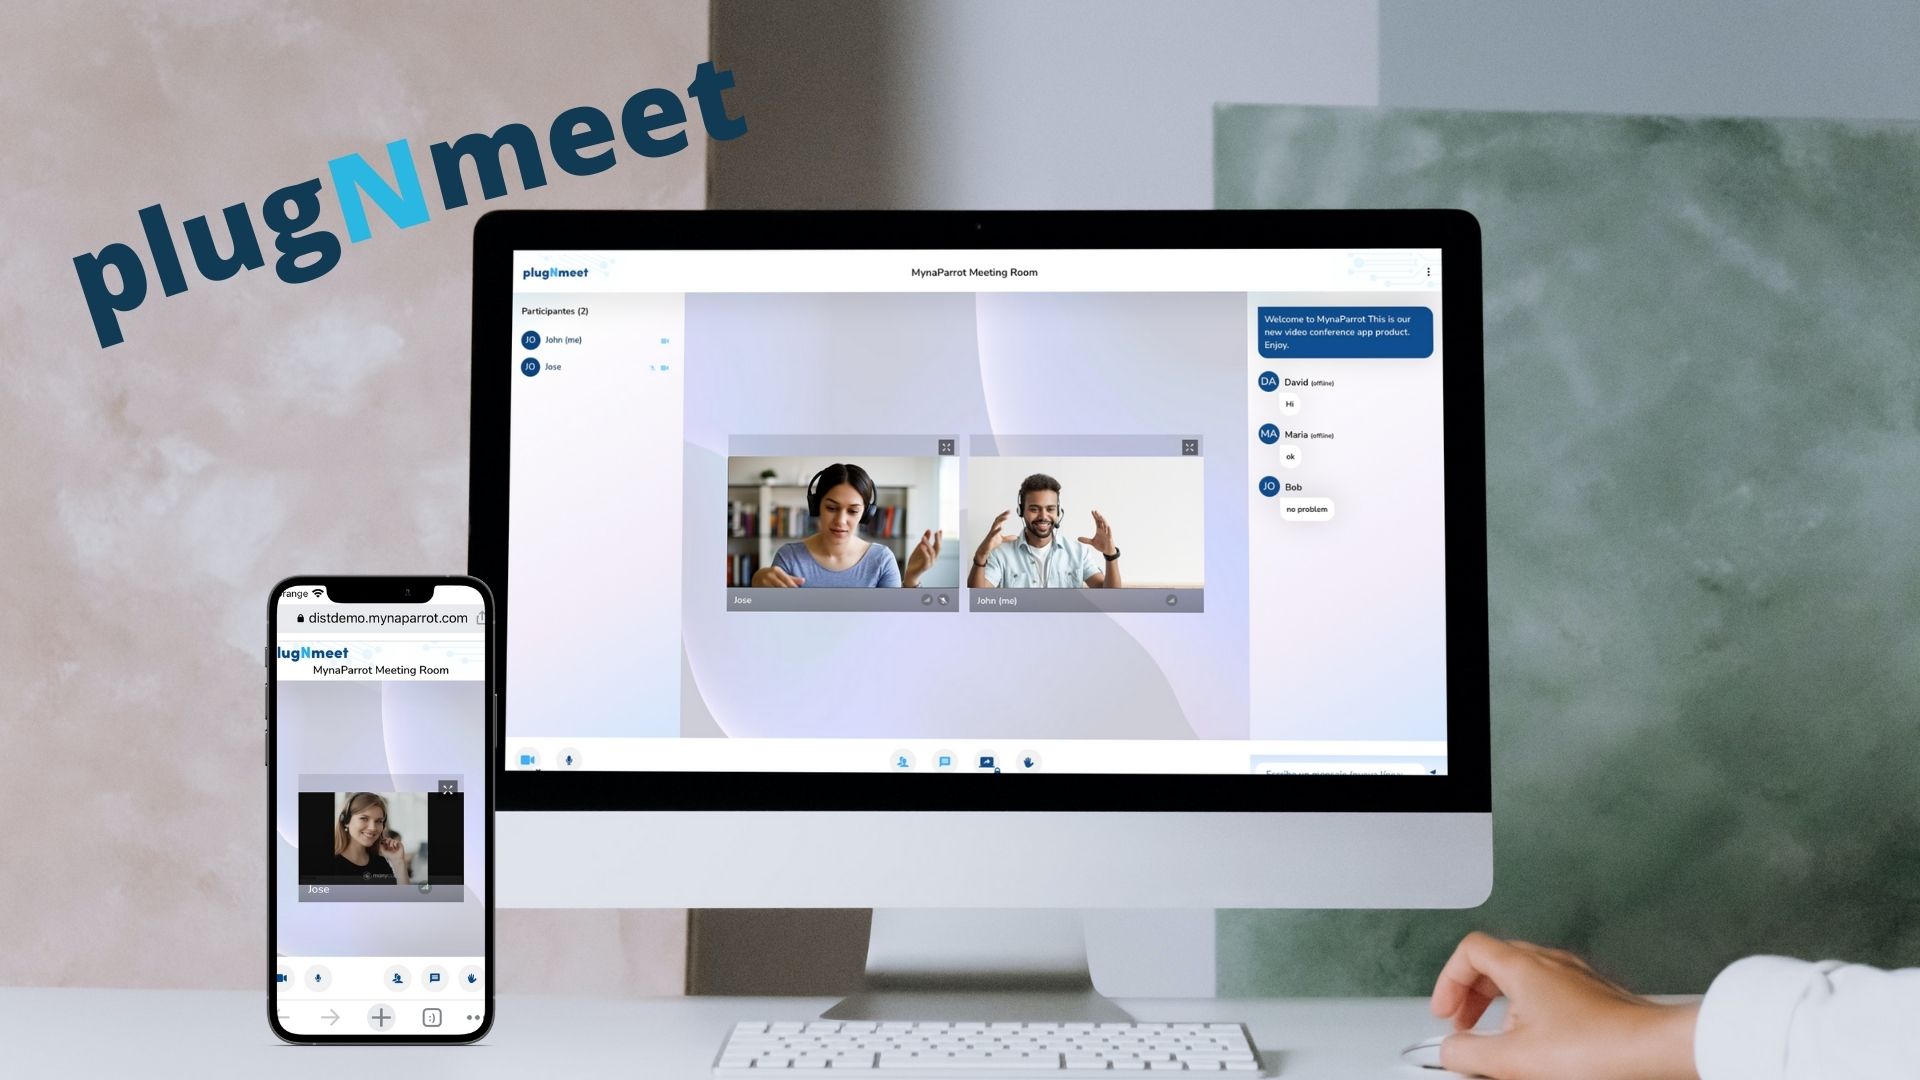 The new open-source video conference software makes it simpler to integrate and personalize your video conferences.